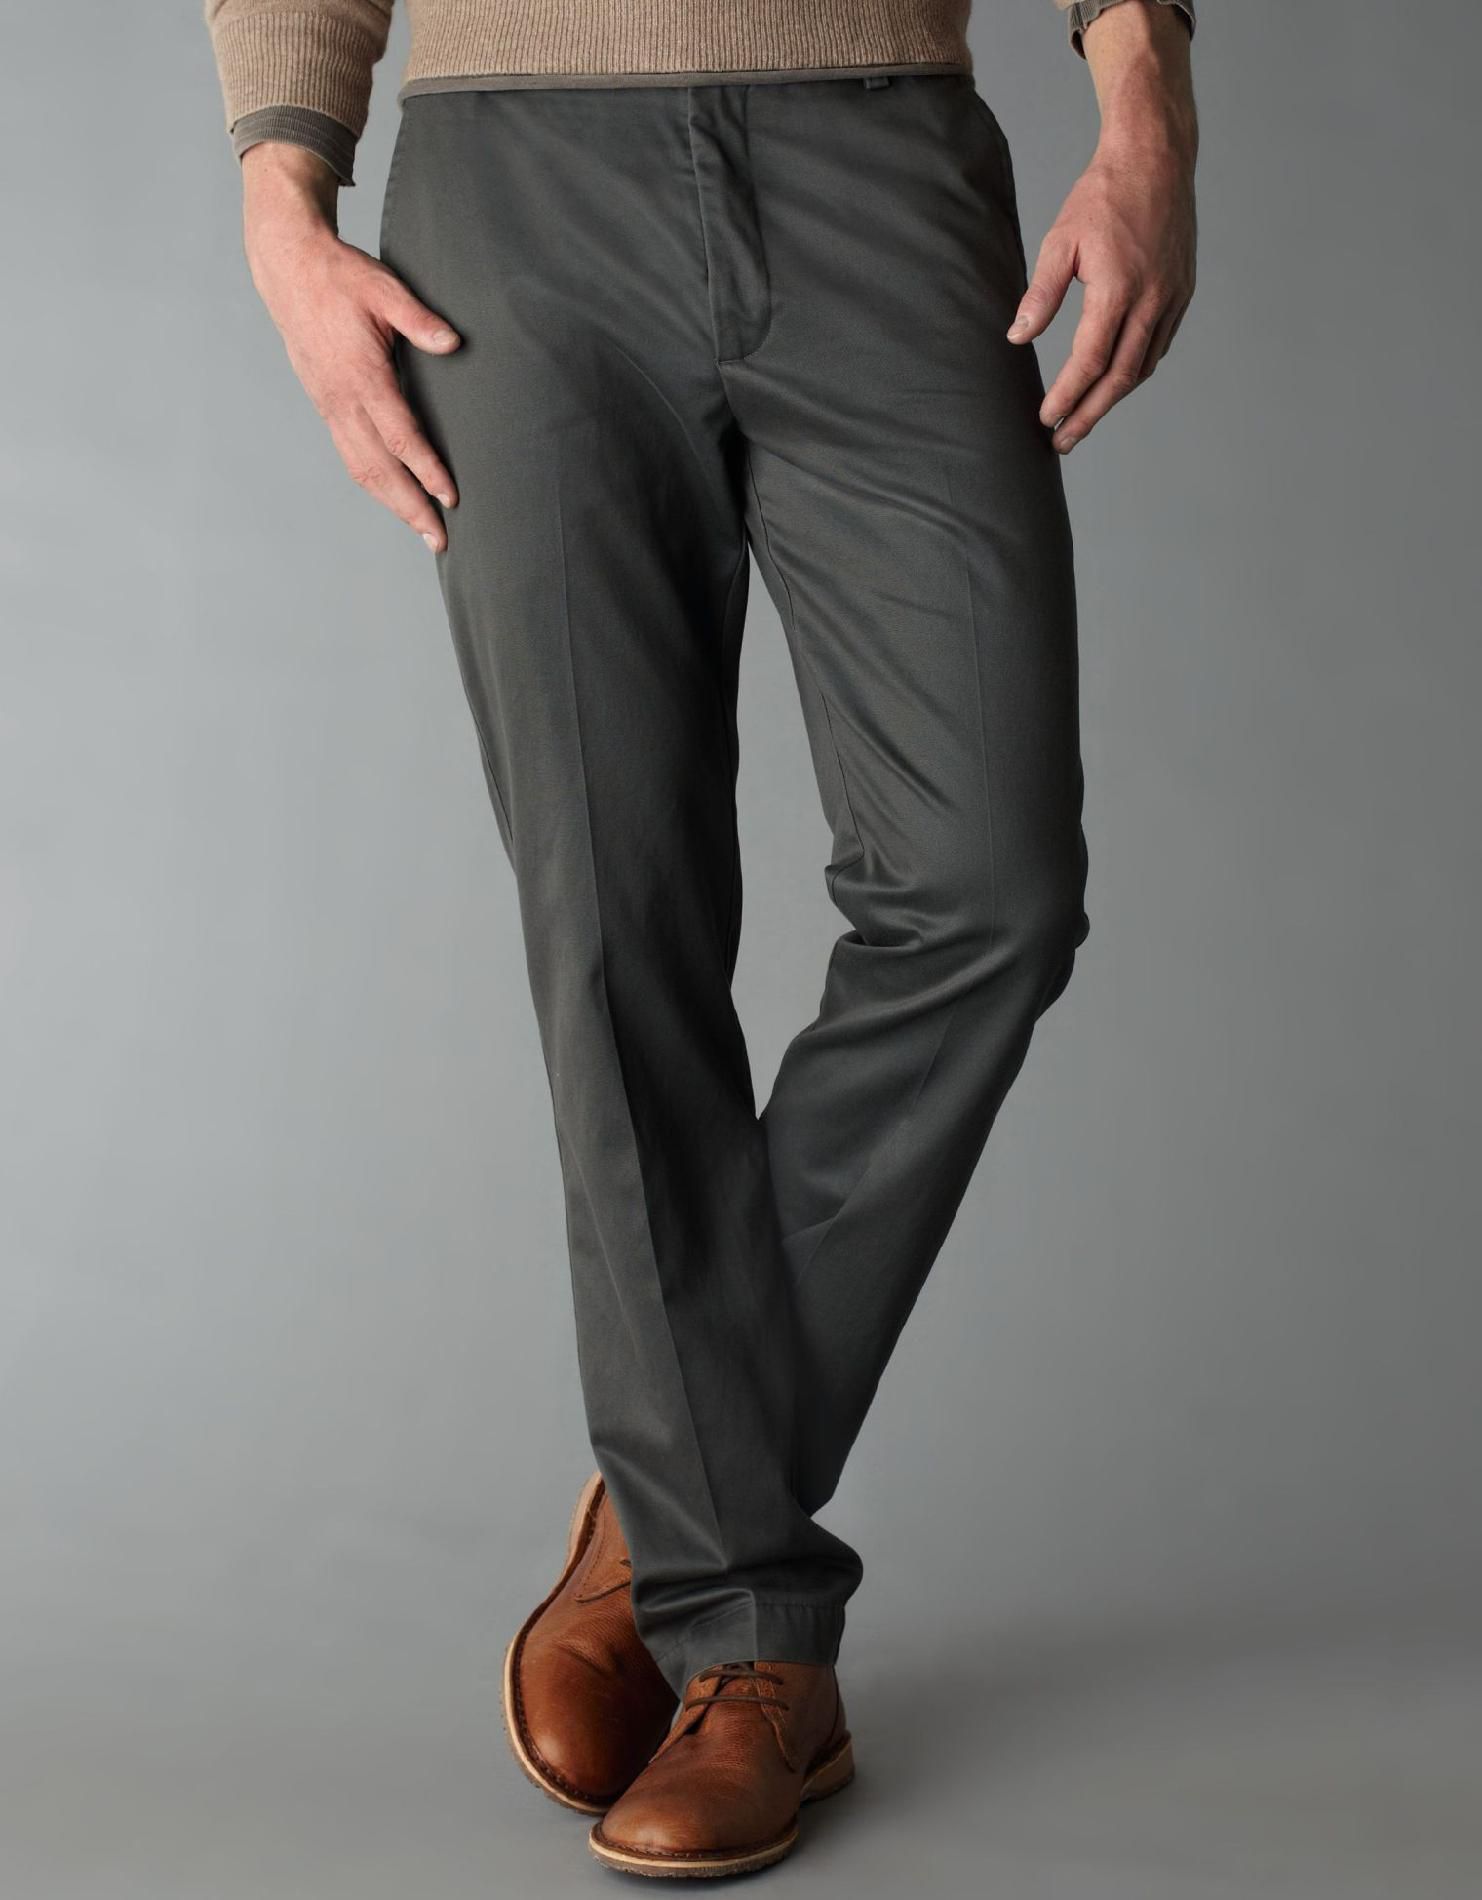 Dockers Khaki: Ultimate Casual Style at Sears